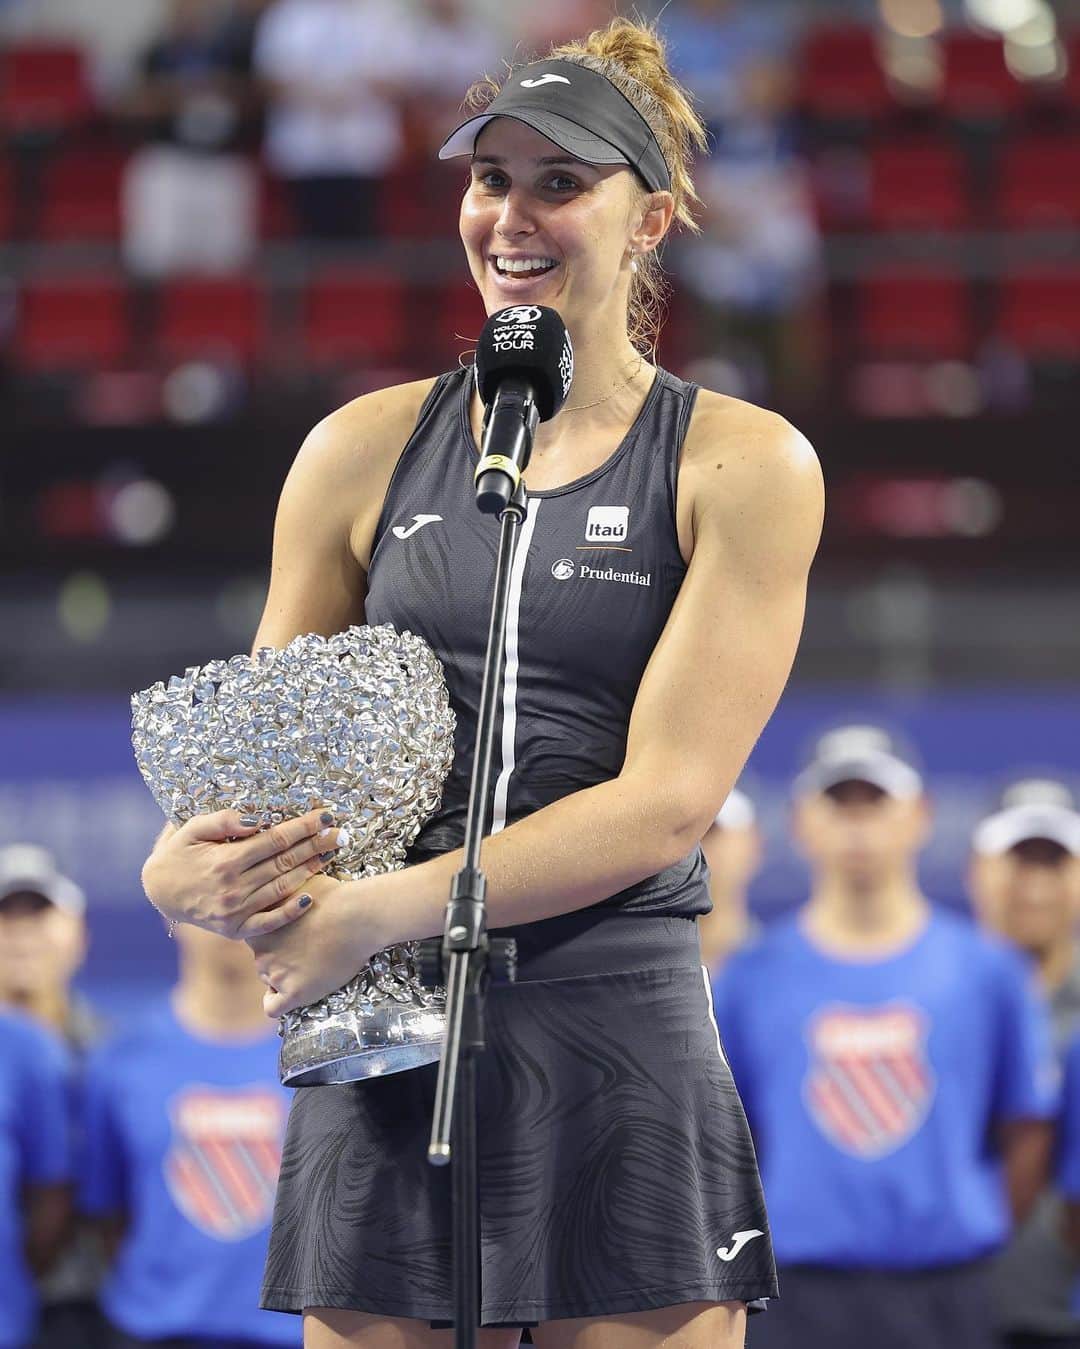 WTA（女子テニス協会）のインスタグラム：「Her third and biggest Hologic WTA Tour title to date 🏆🏆🏆  @biahaddadmaia captures Zhuhai without dropping a set!   #WTAEliteTrophy」